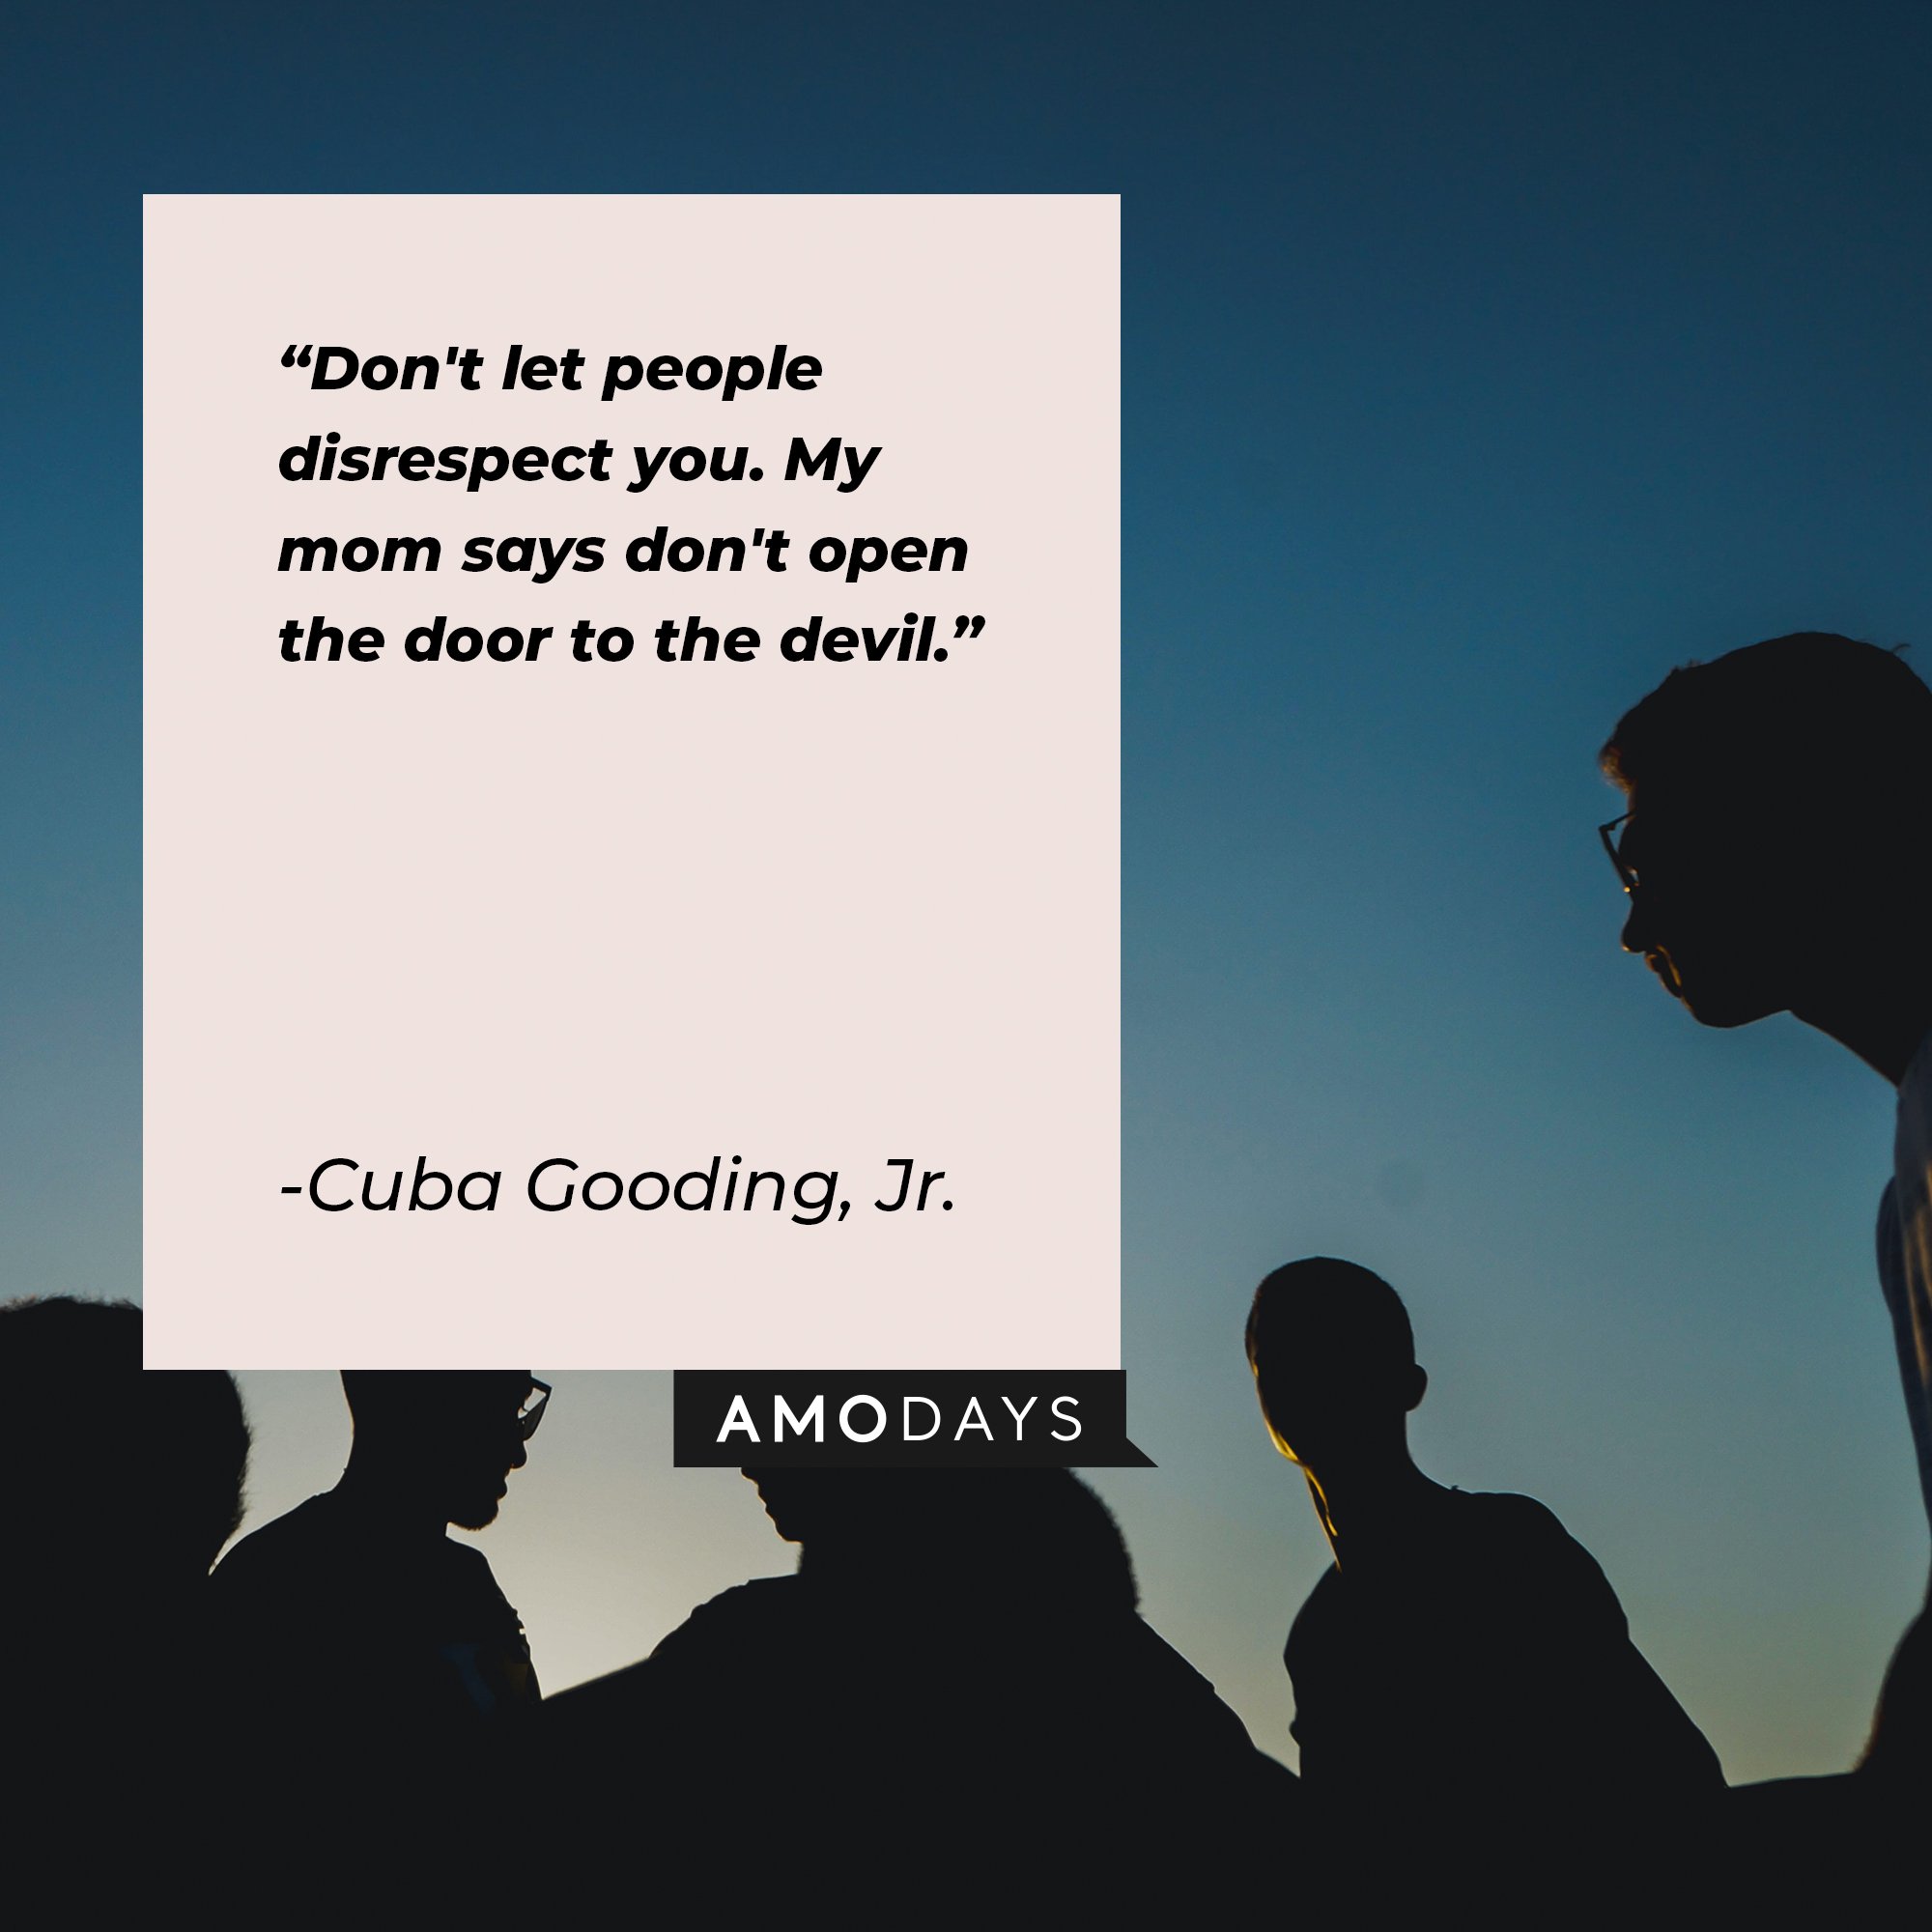 Cuba Gooding, Jr.’s quote: “Don't let people disrespect you. My mom says don't open the door to the devil.” | Image: AmoDays